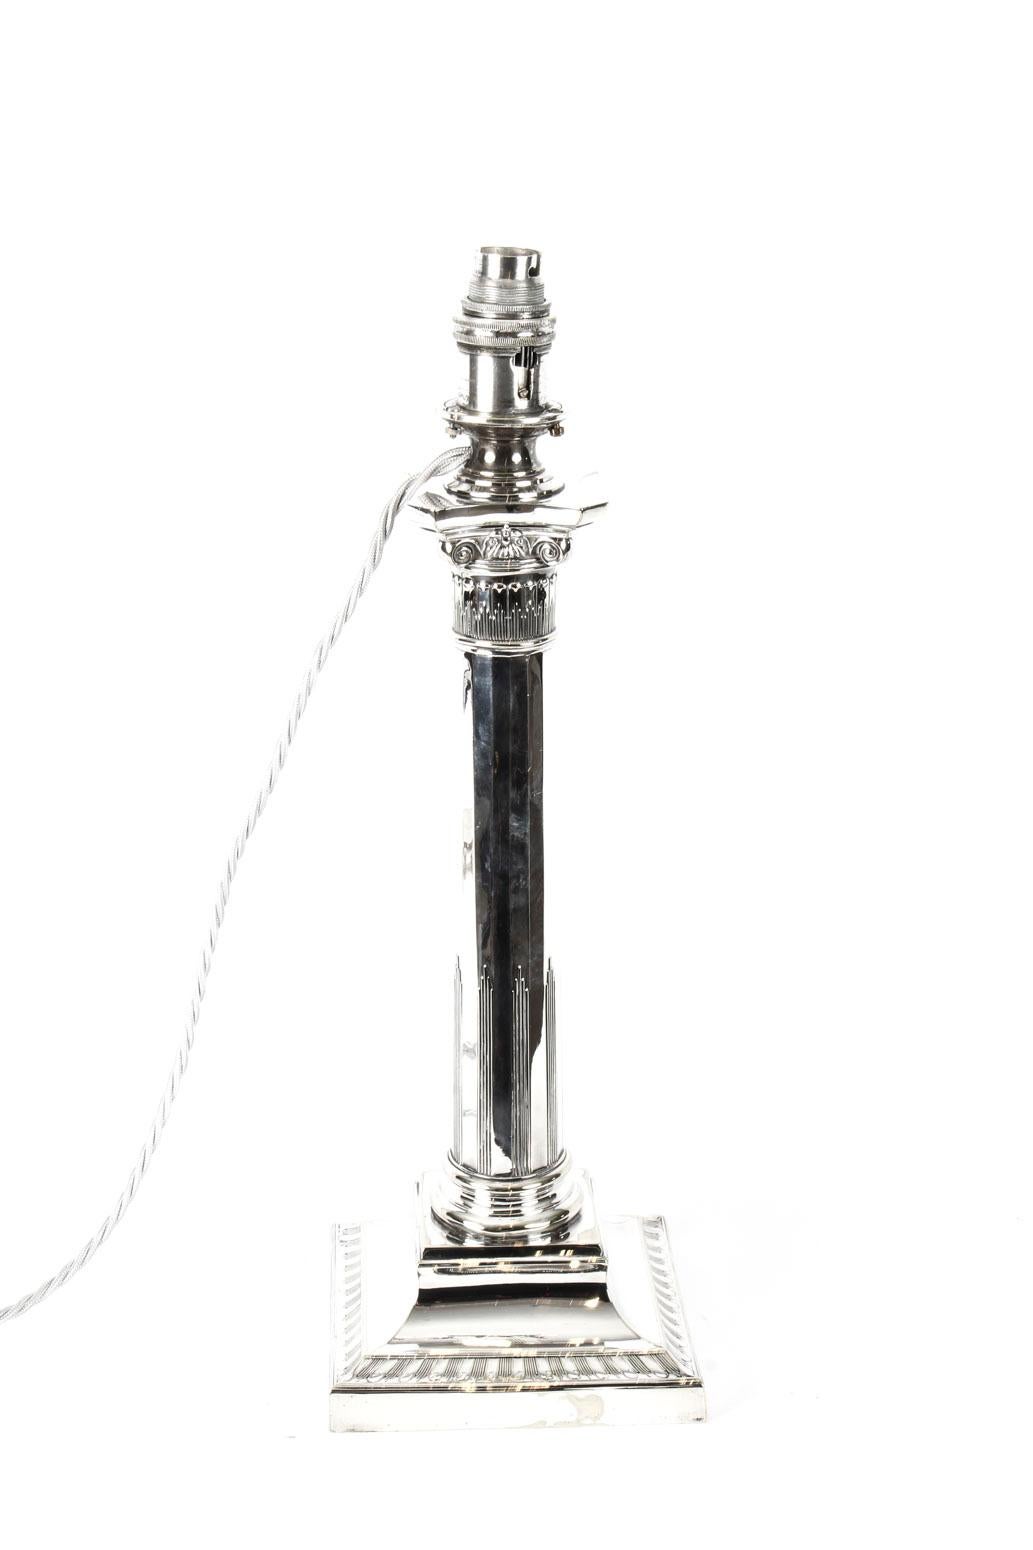 This is an impressive antique Victorian silver plated Corinthian column table lamp bearing the makers mark of the renowned silversmith Hawksworth, Eyre & Co, late 19th century in date.
 
It features a classic Corinthian capital decorated with